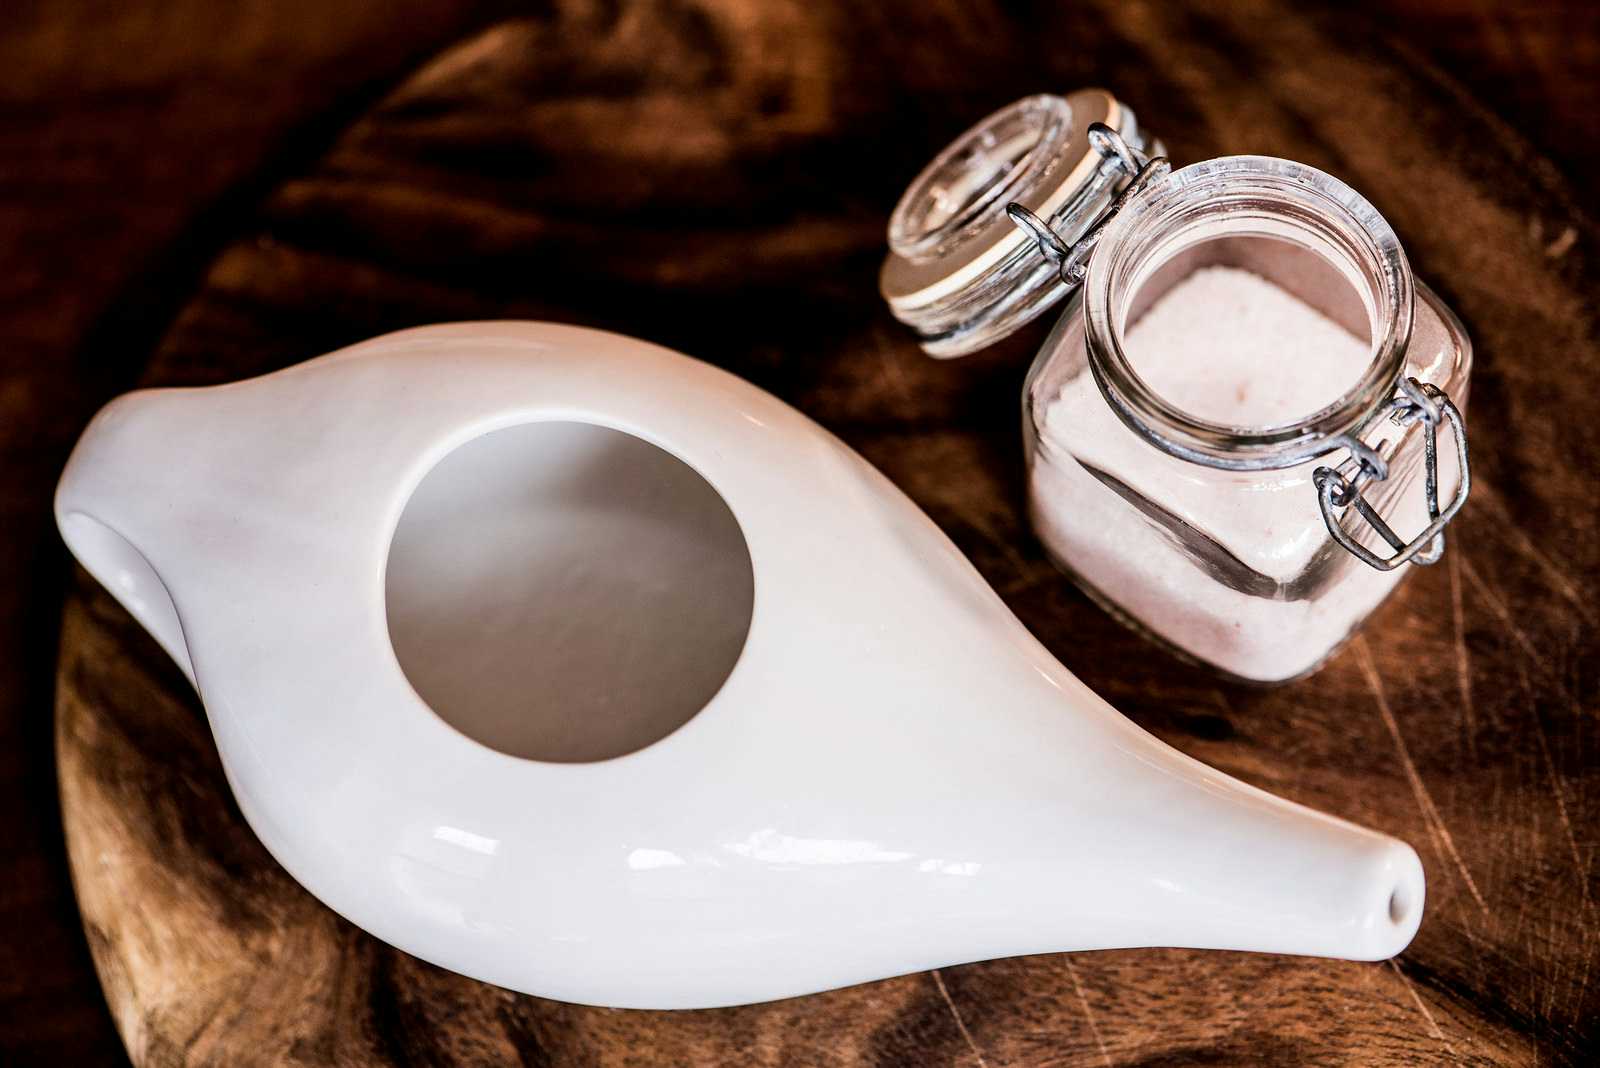 Tap water isn't safe to use in neti pots and other home medical devices.  Here's what to do instead